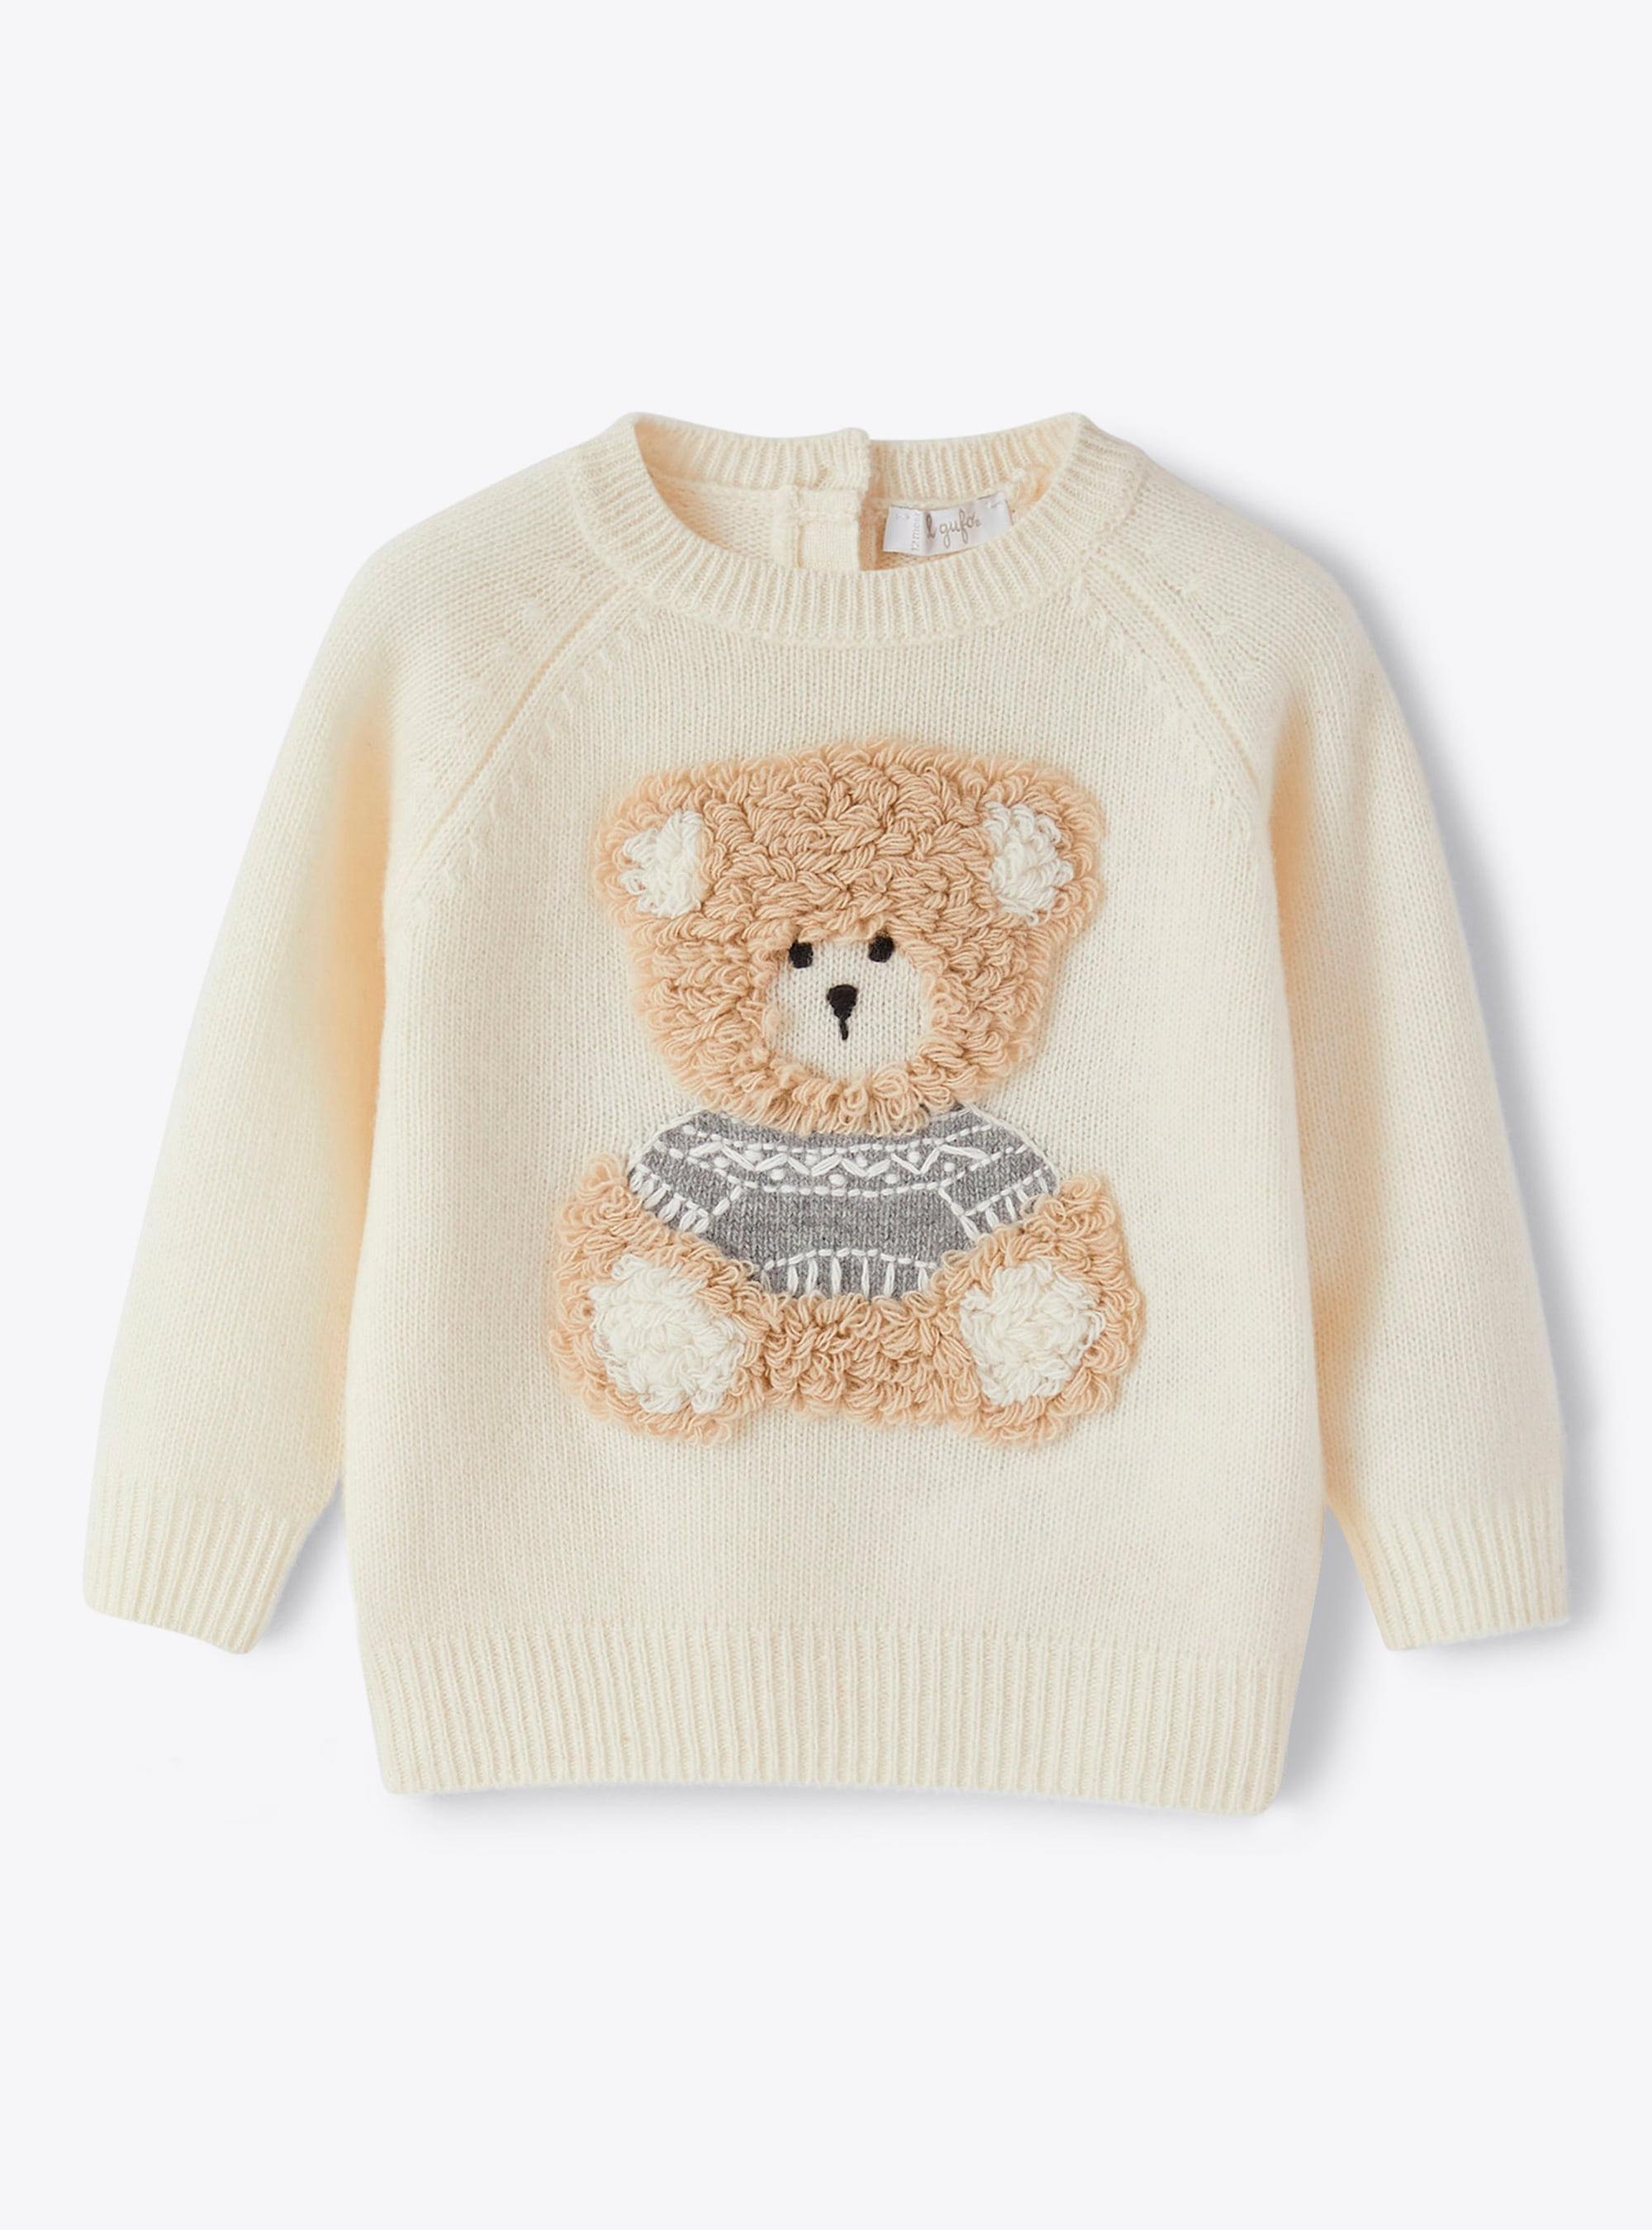 White wool sweater with teddy bear - White | Il Gufo